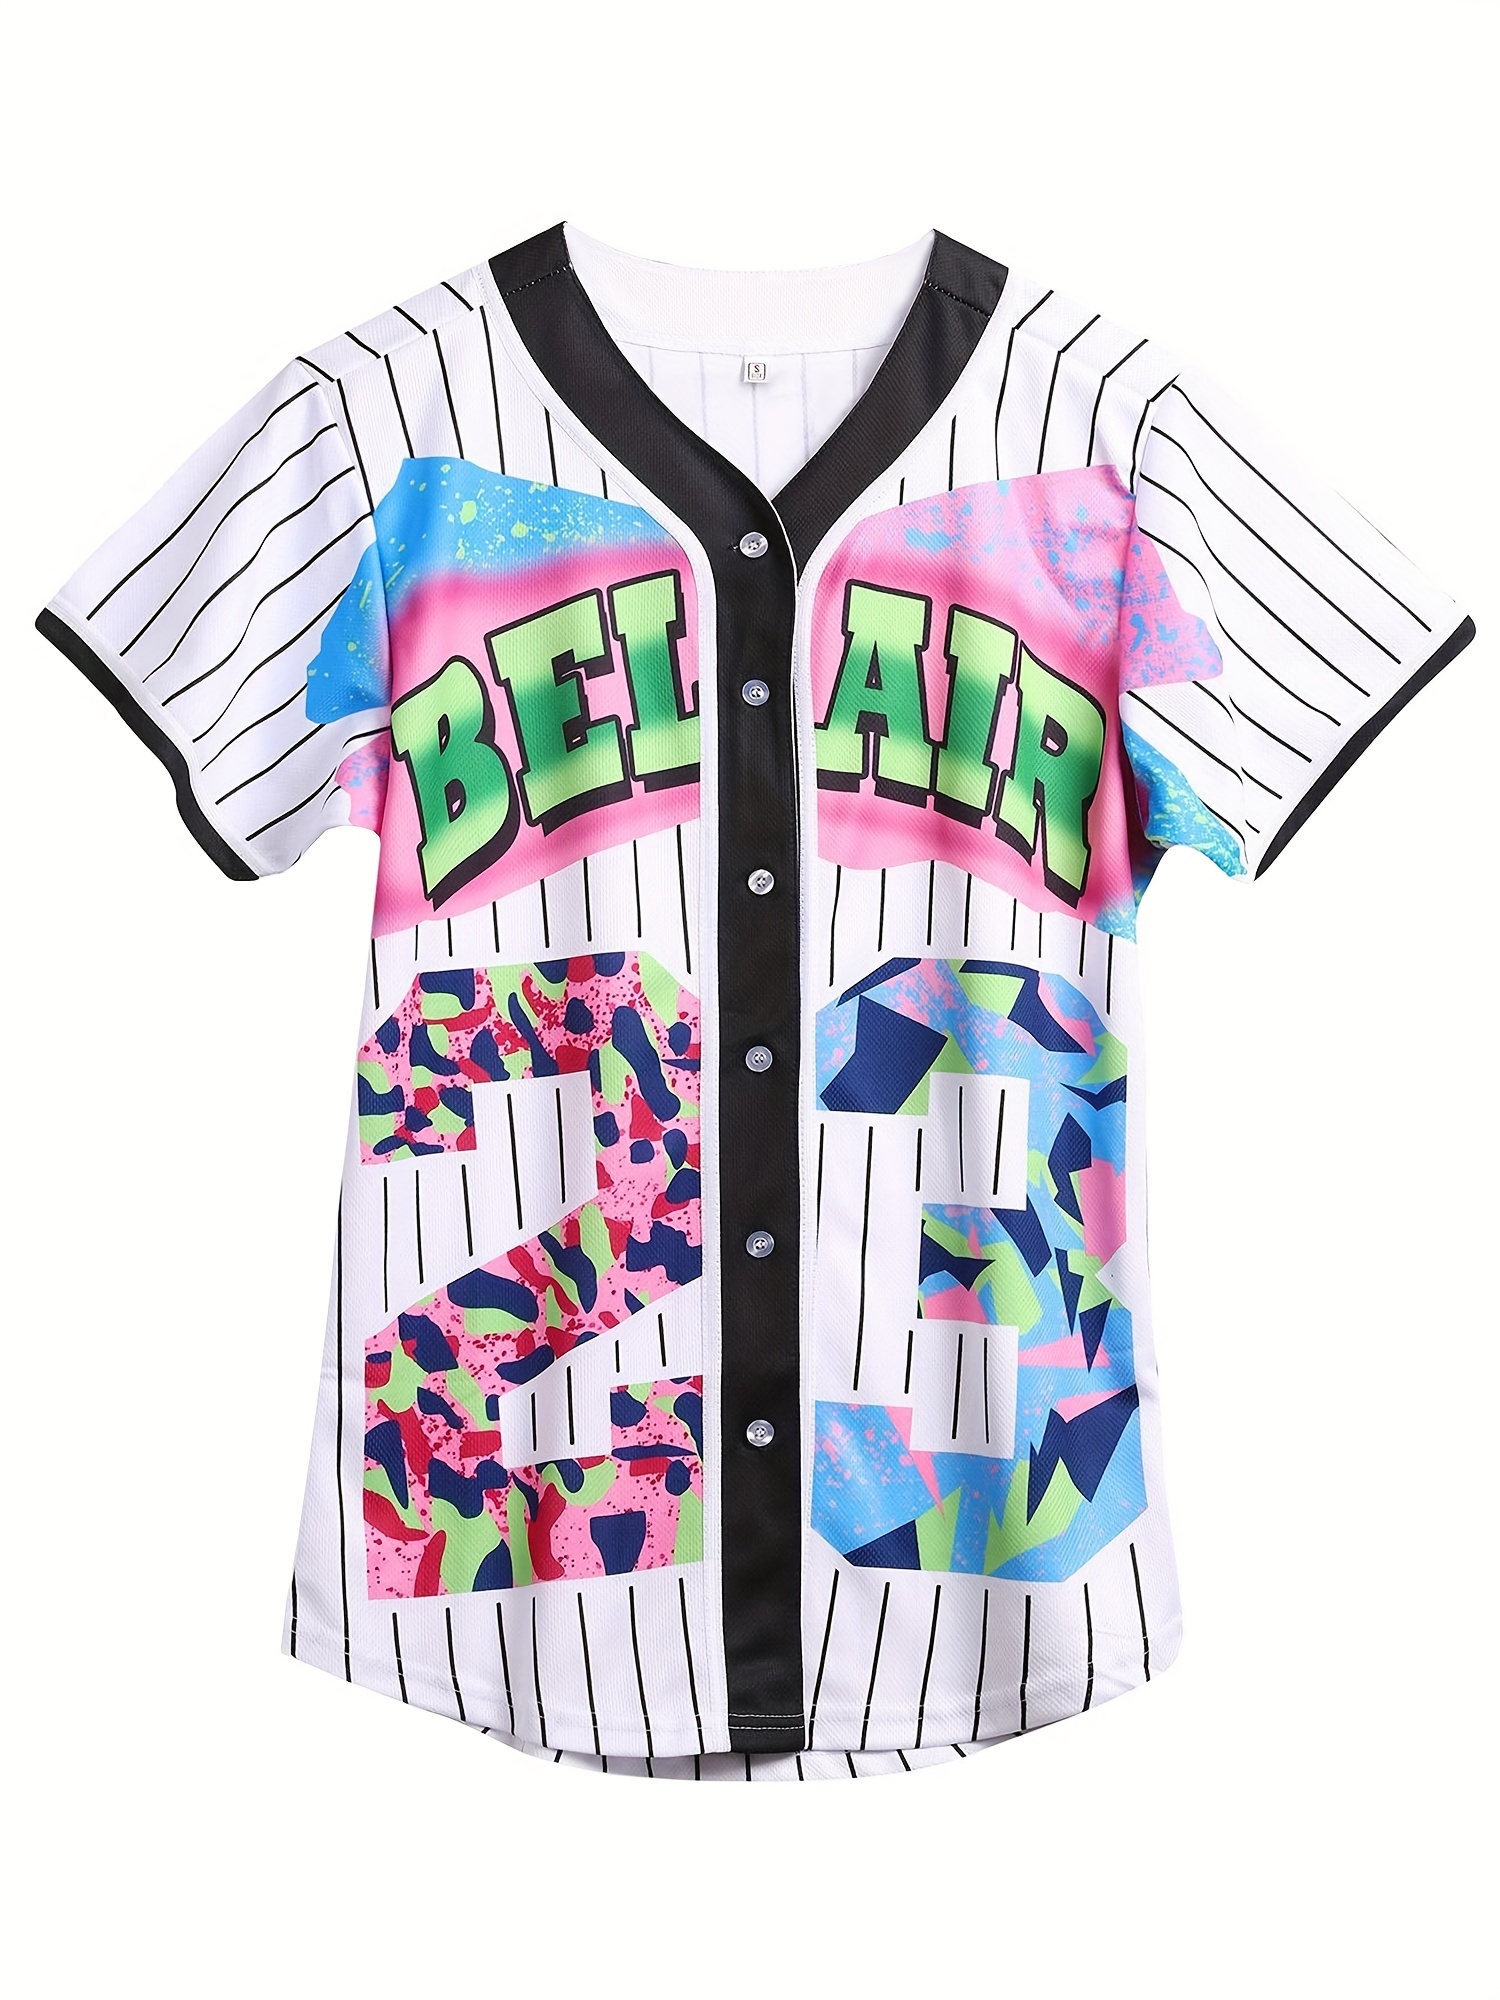 Baseball Jersey Classic New York 23 Stripes Design Printed for 80s 90s  Theme Birthday Party 